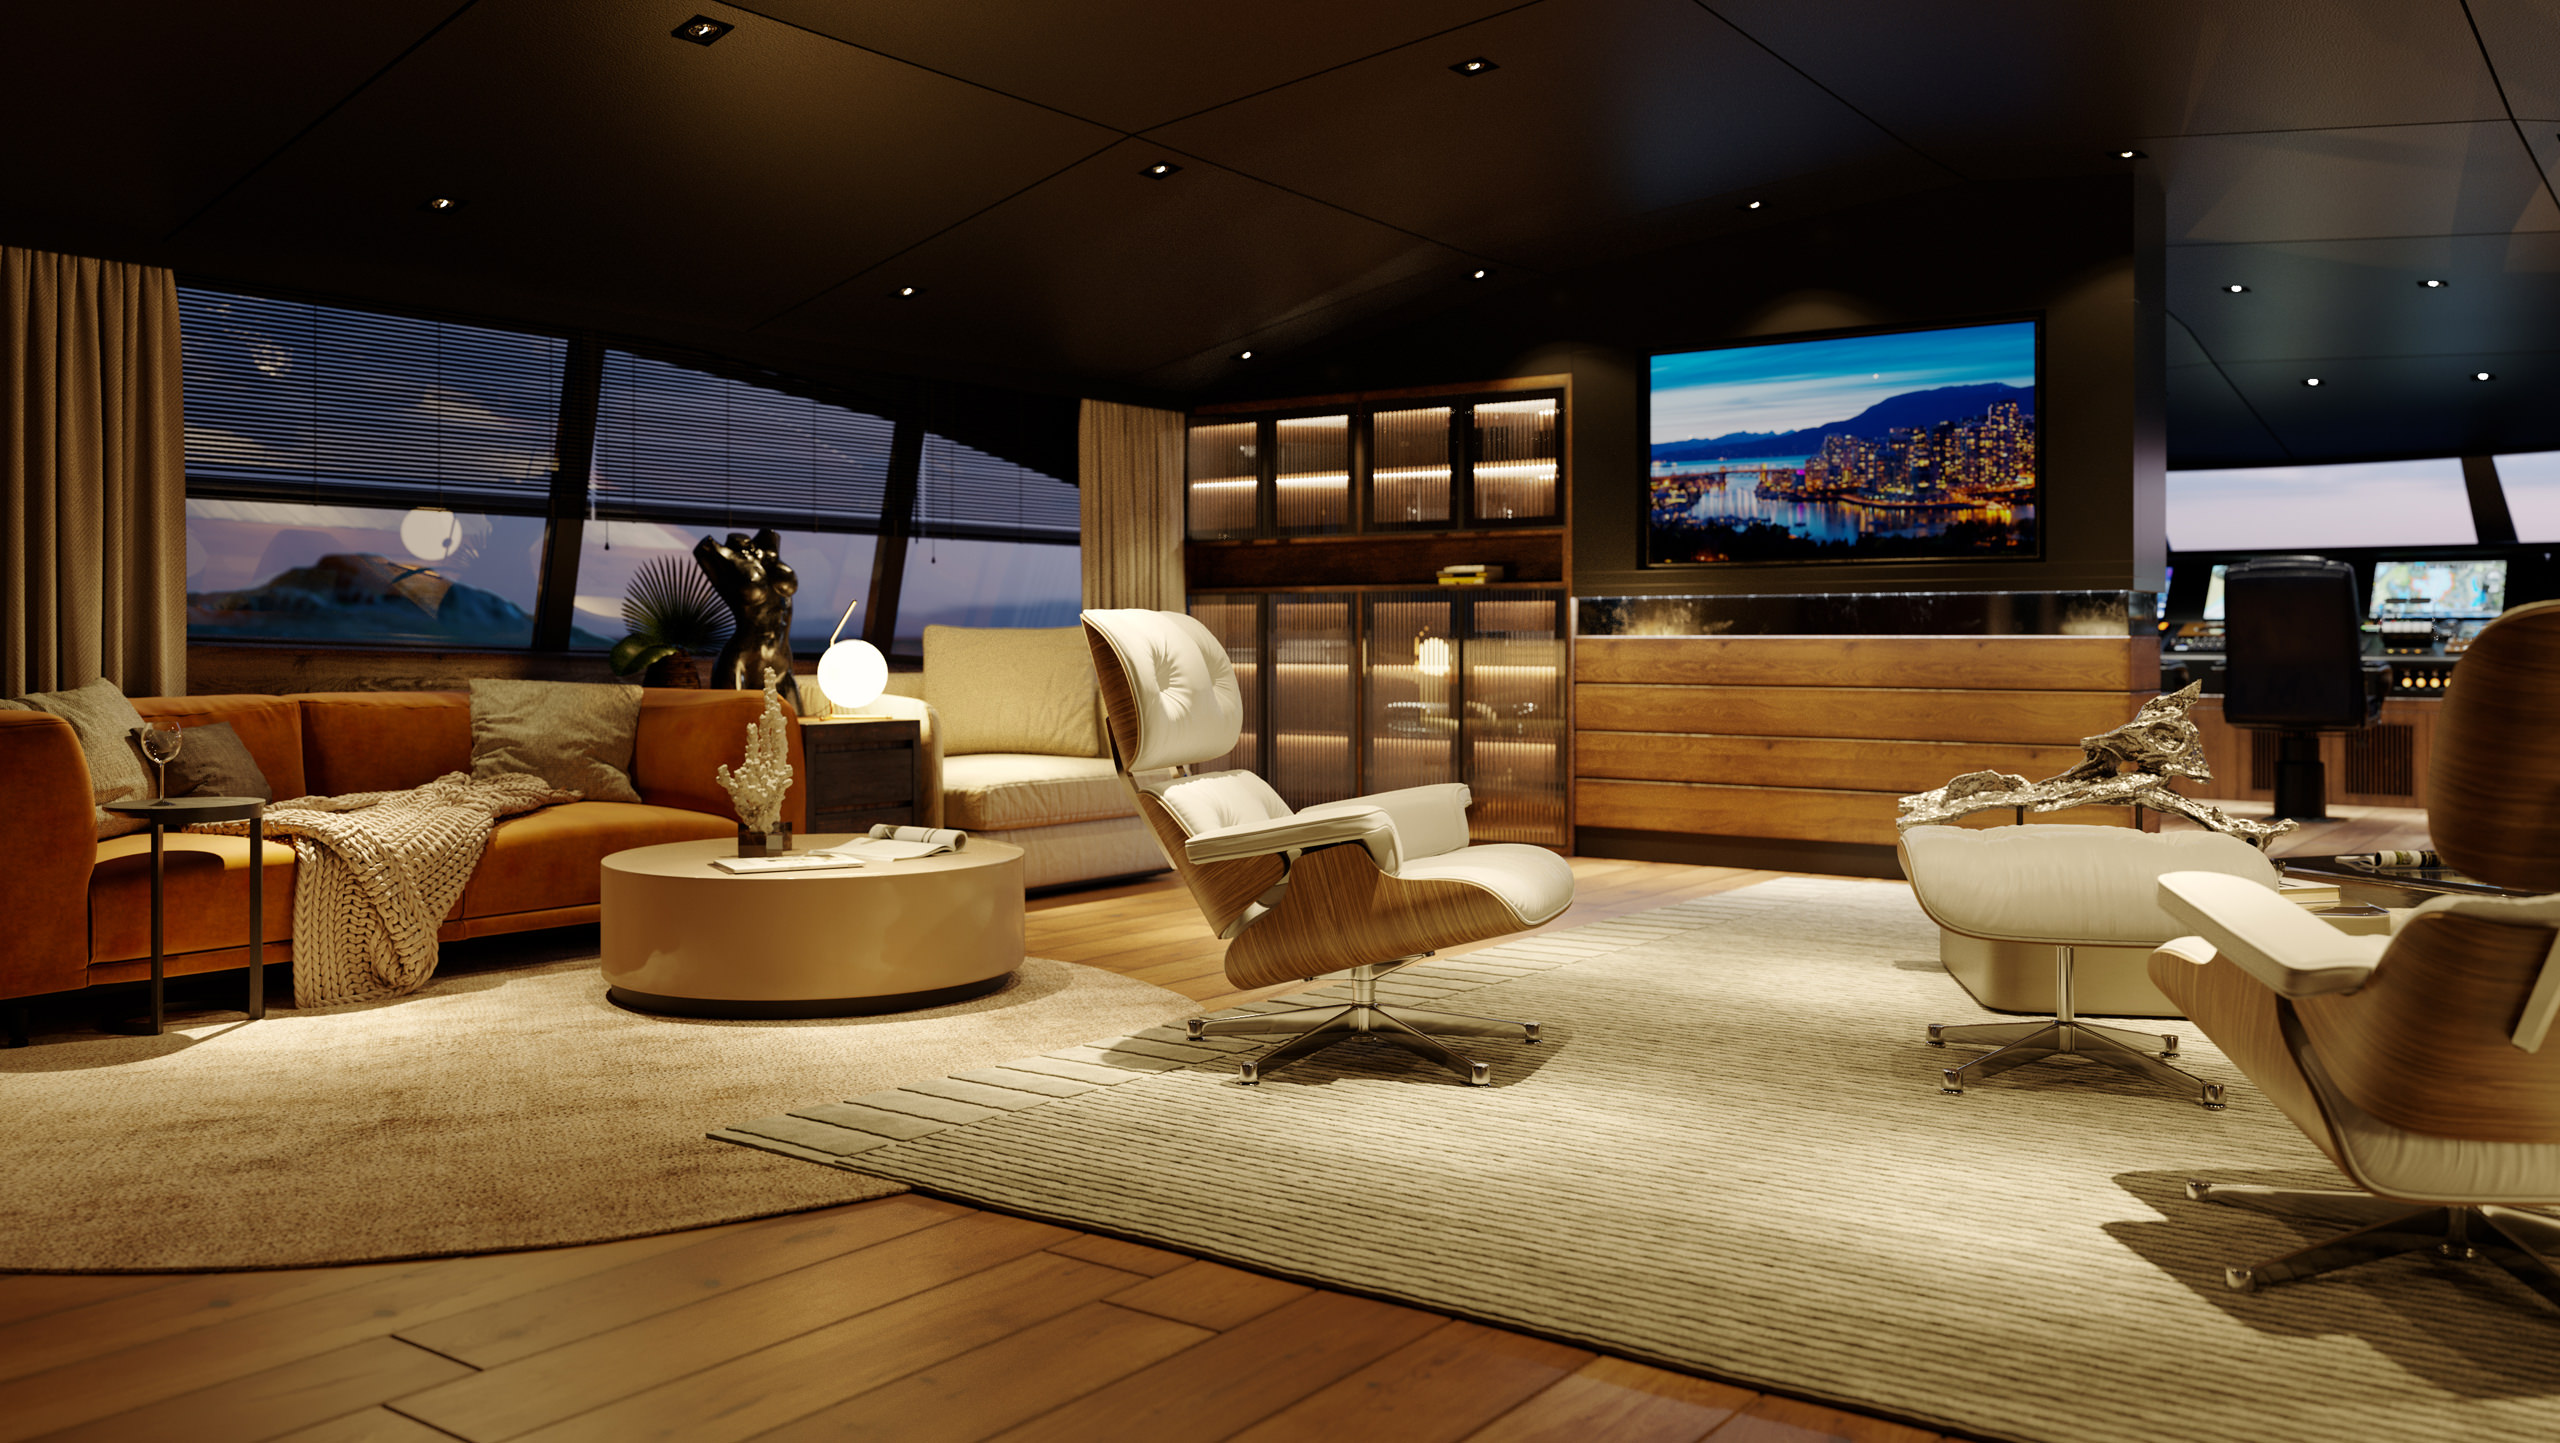 3D Visialization of a yacht interior lounge zone